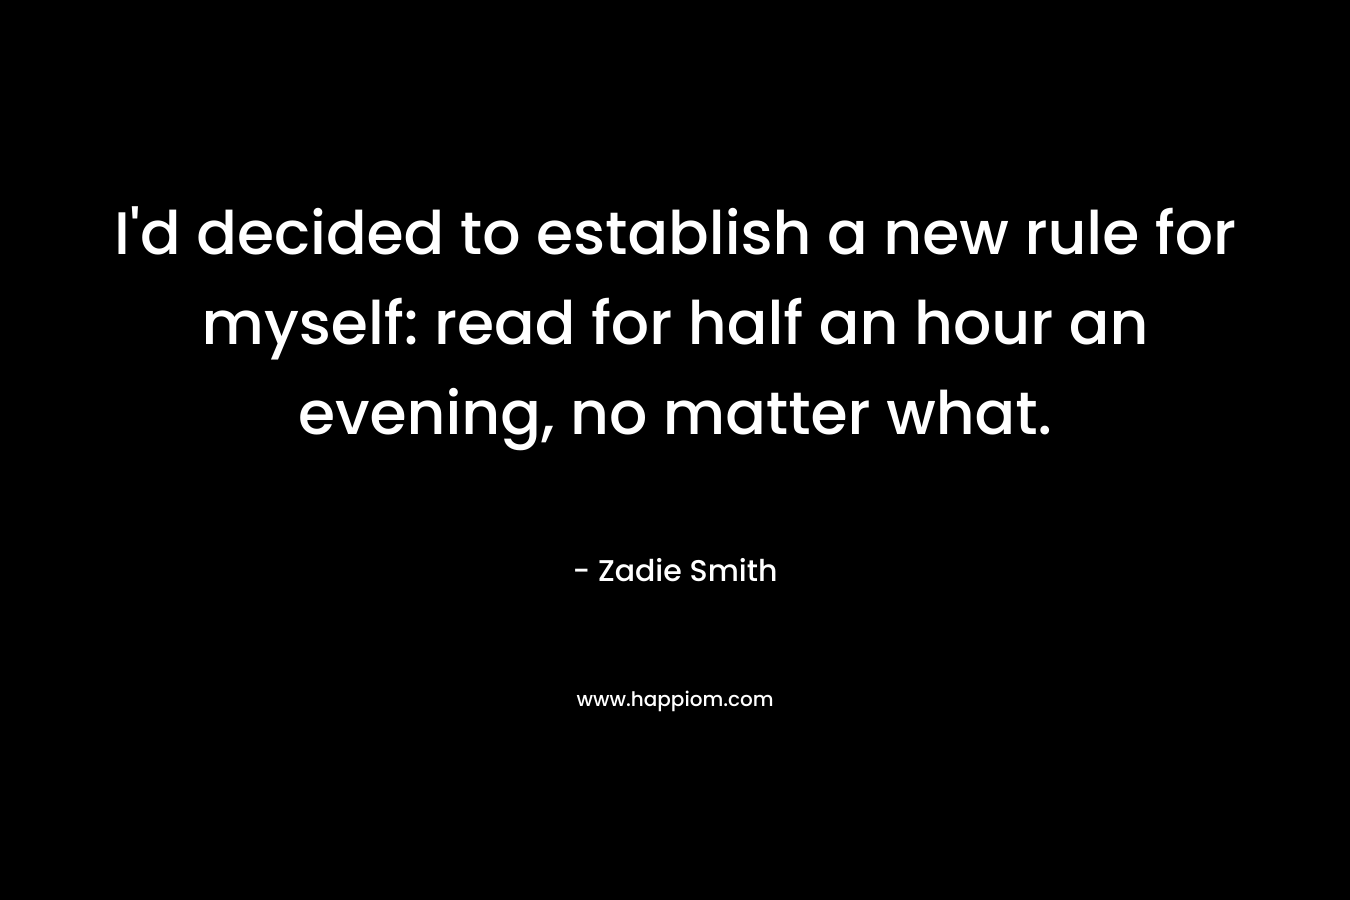 I'd decided to establish a new rule for myself: read for half an hour an evening, no matter what.